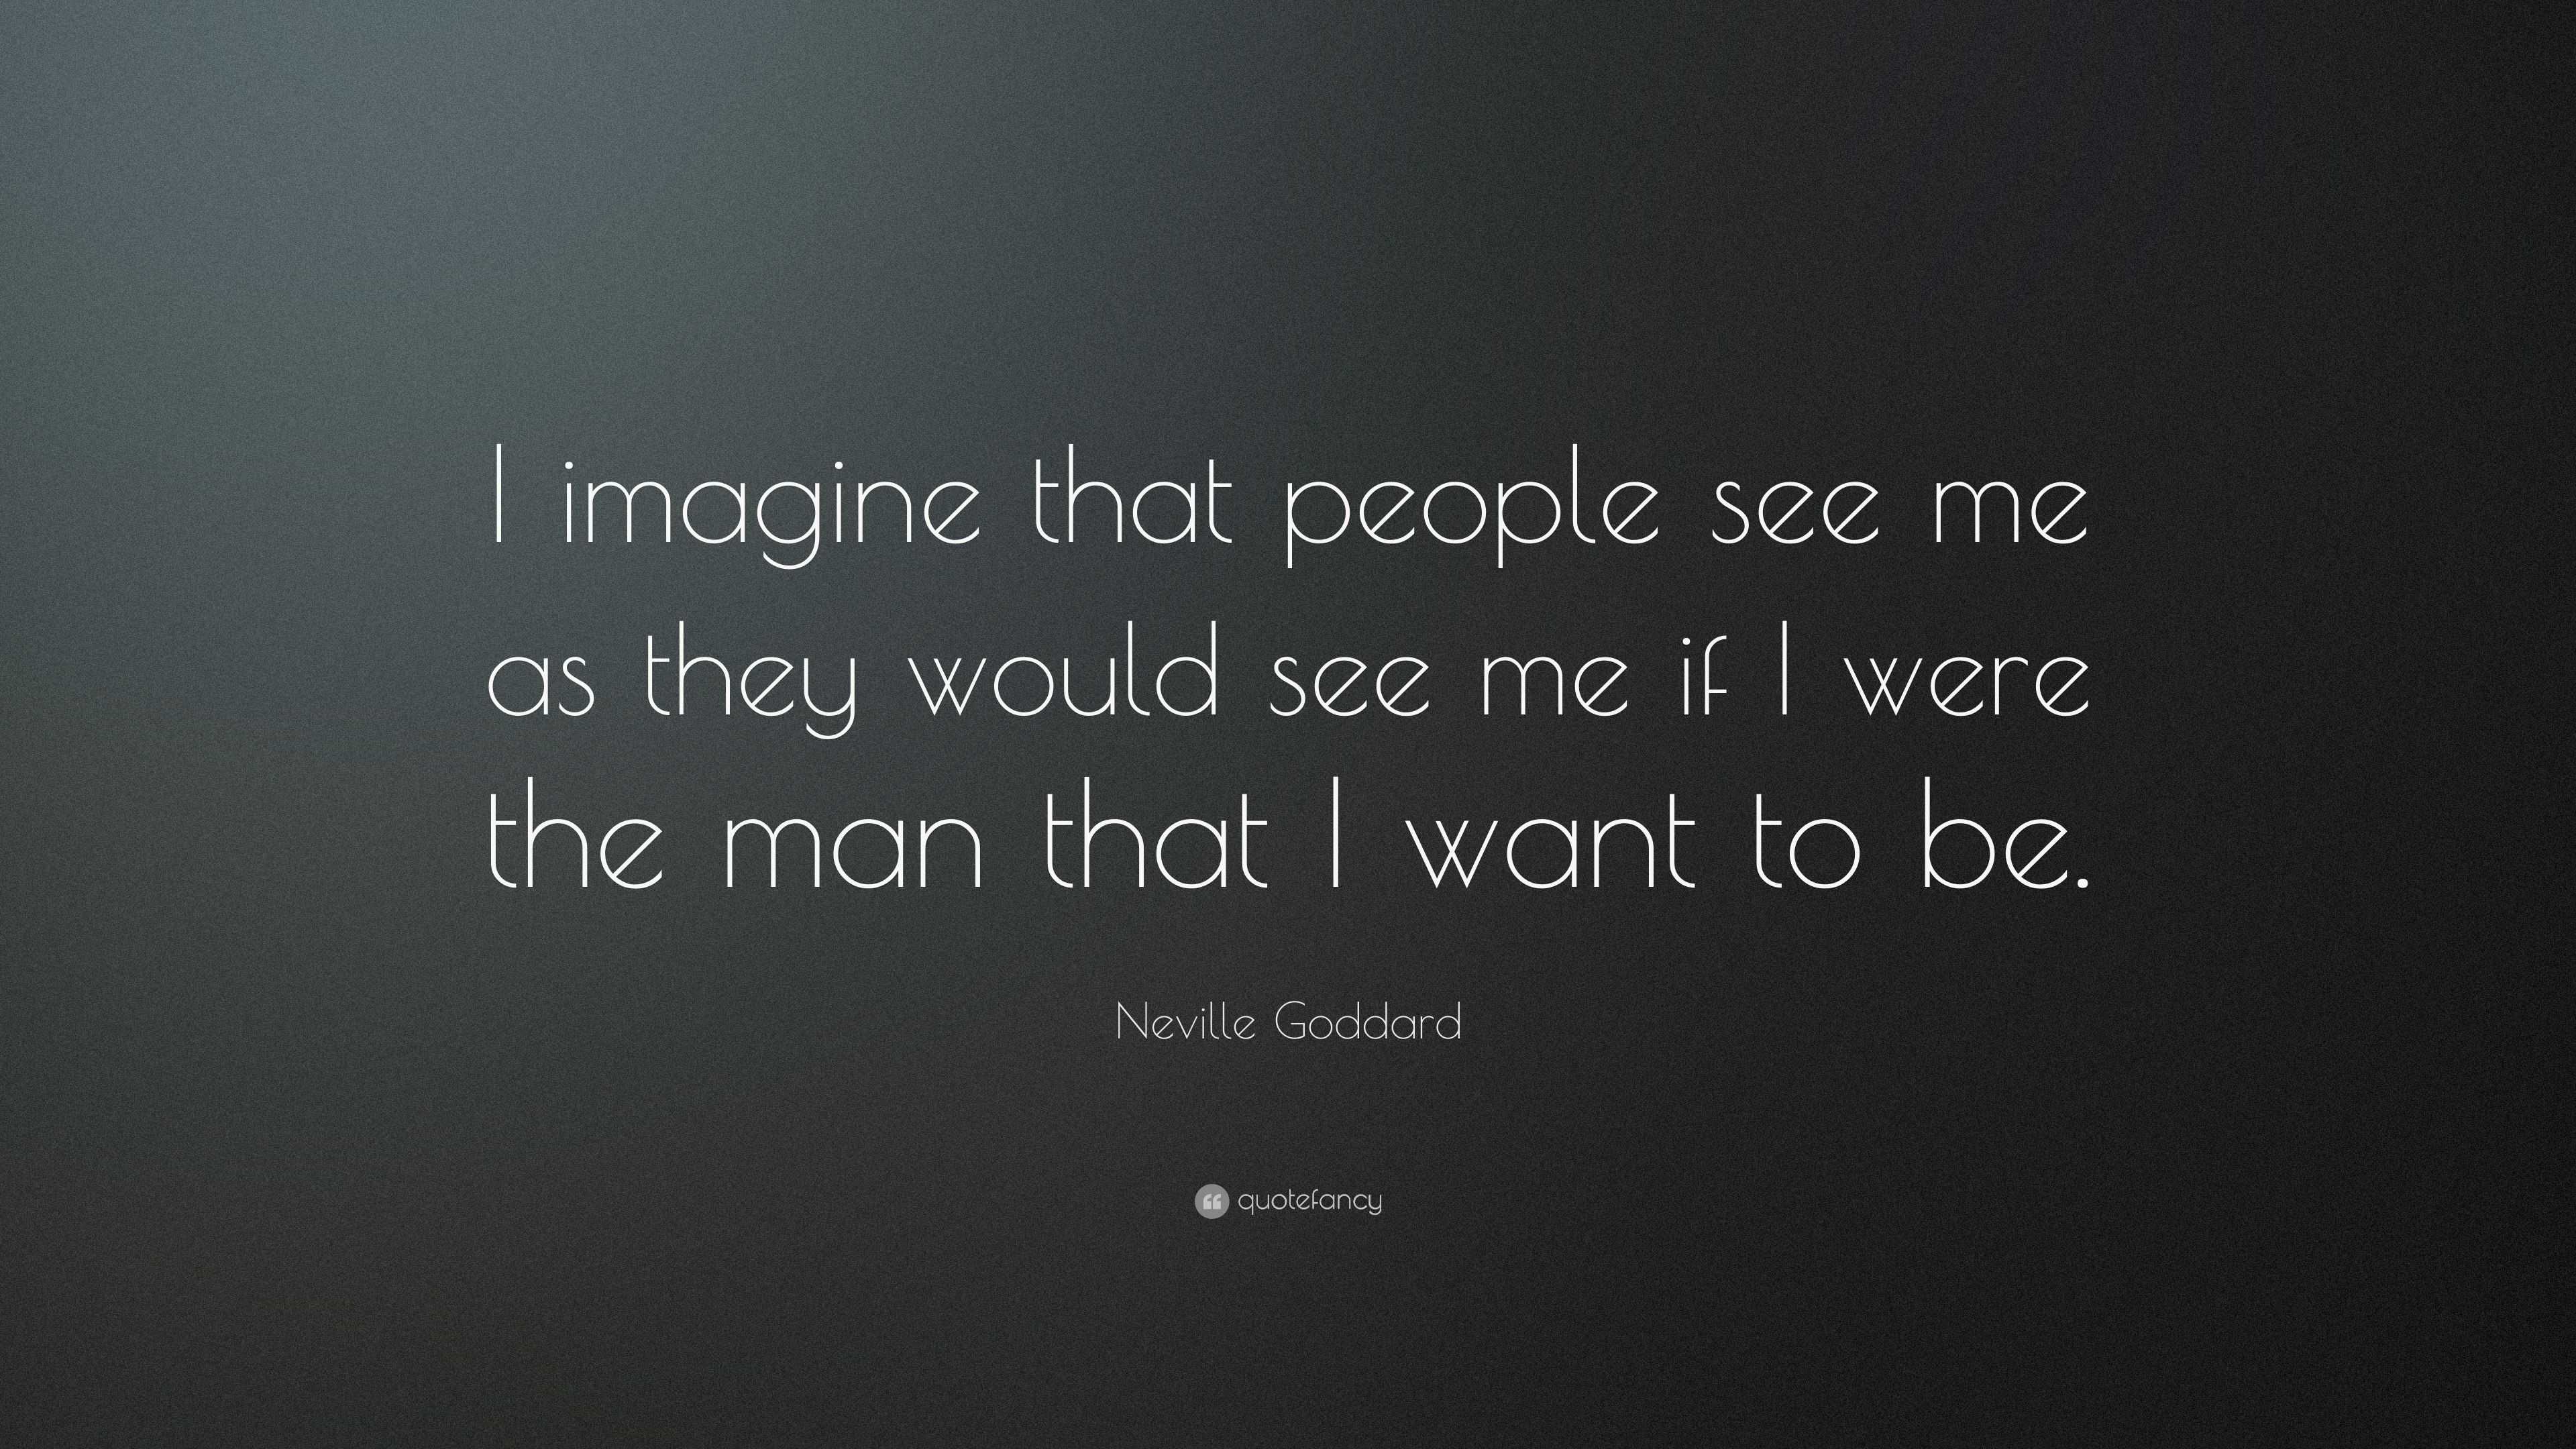 Neville Goddard Quote: “I imagine that people see me as they would see ...